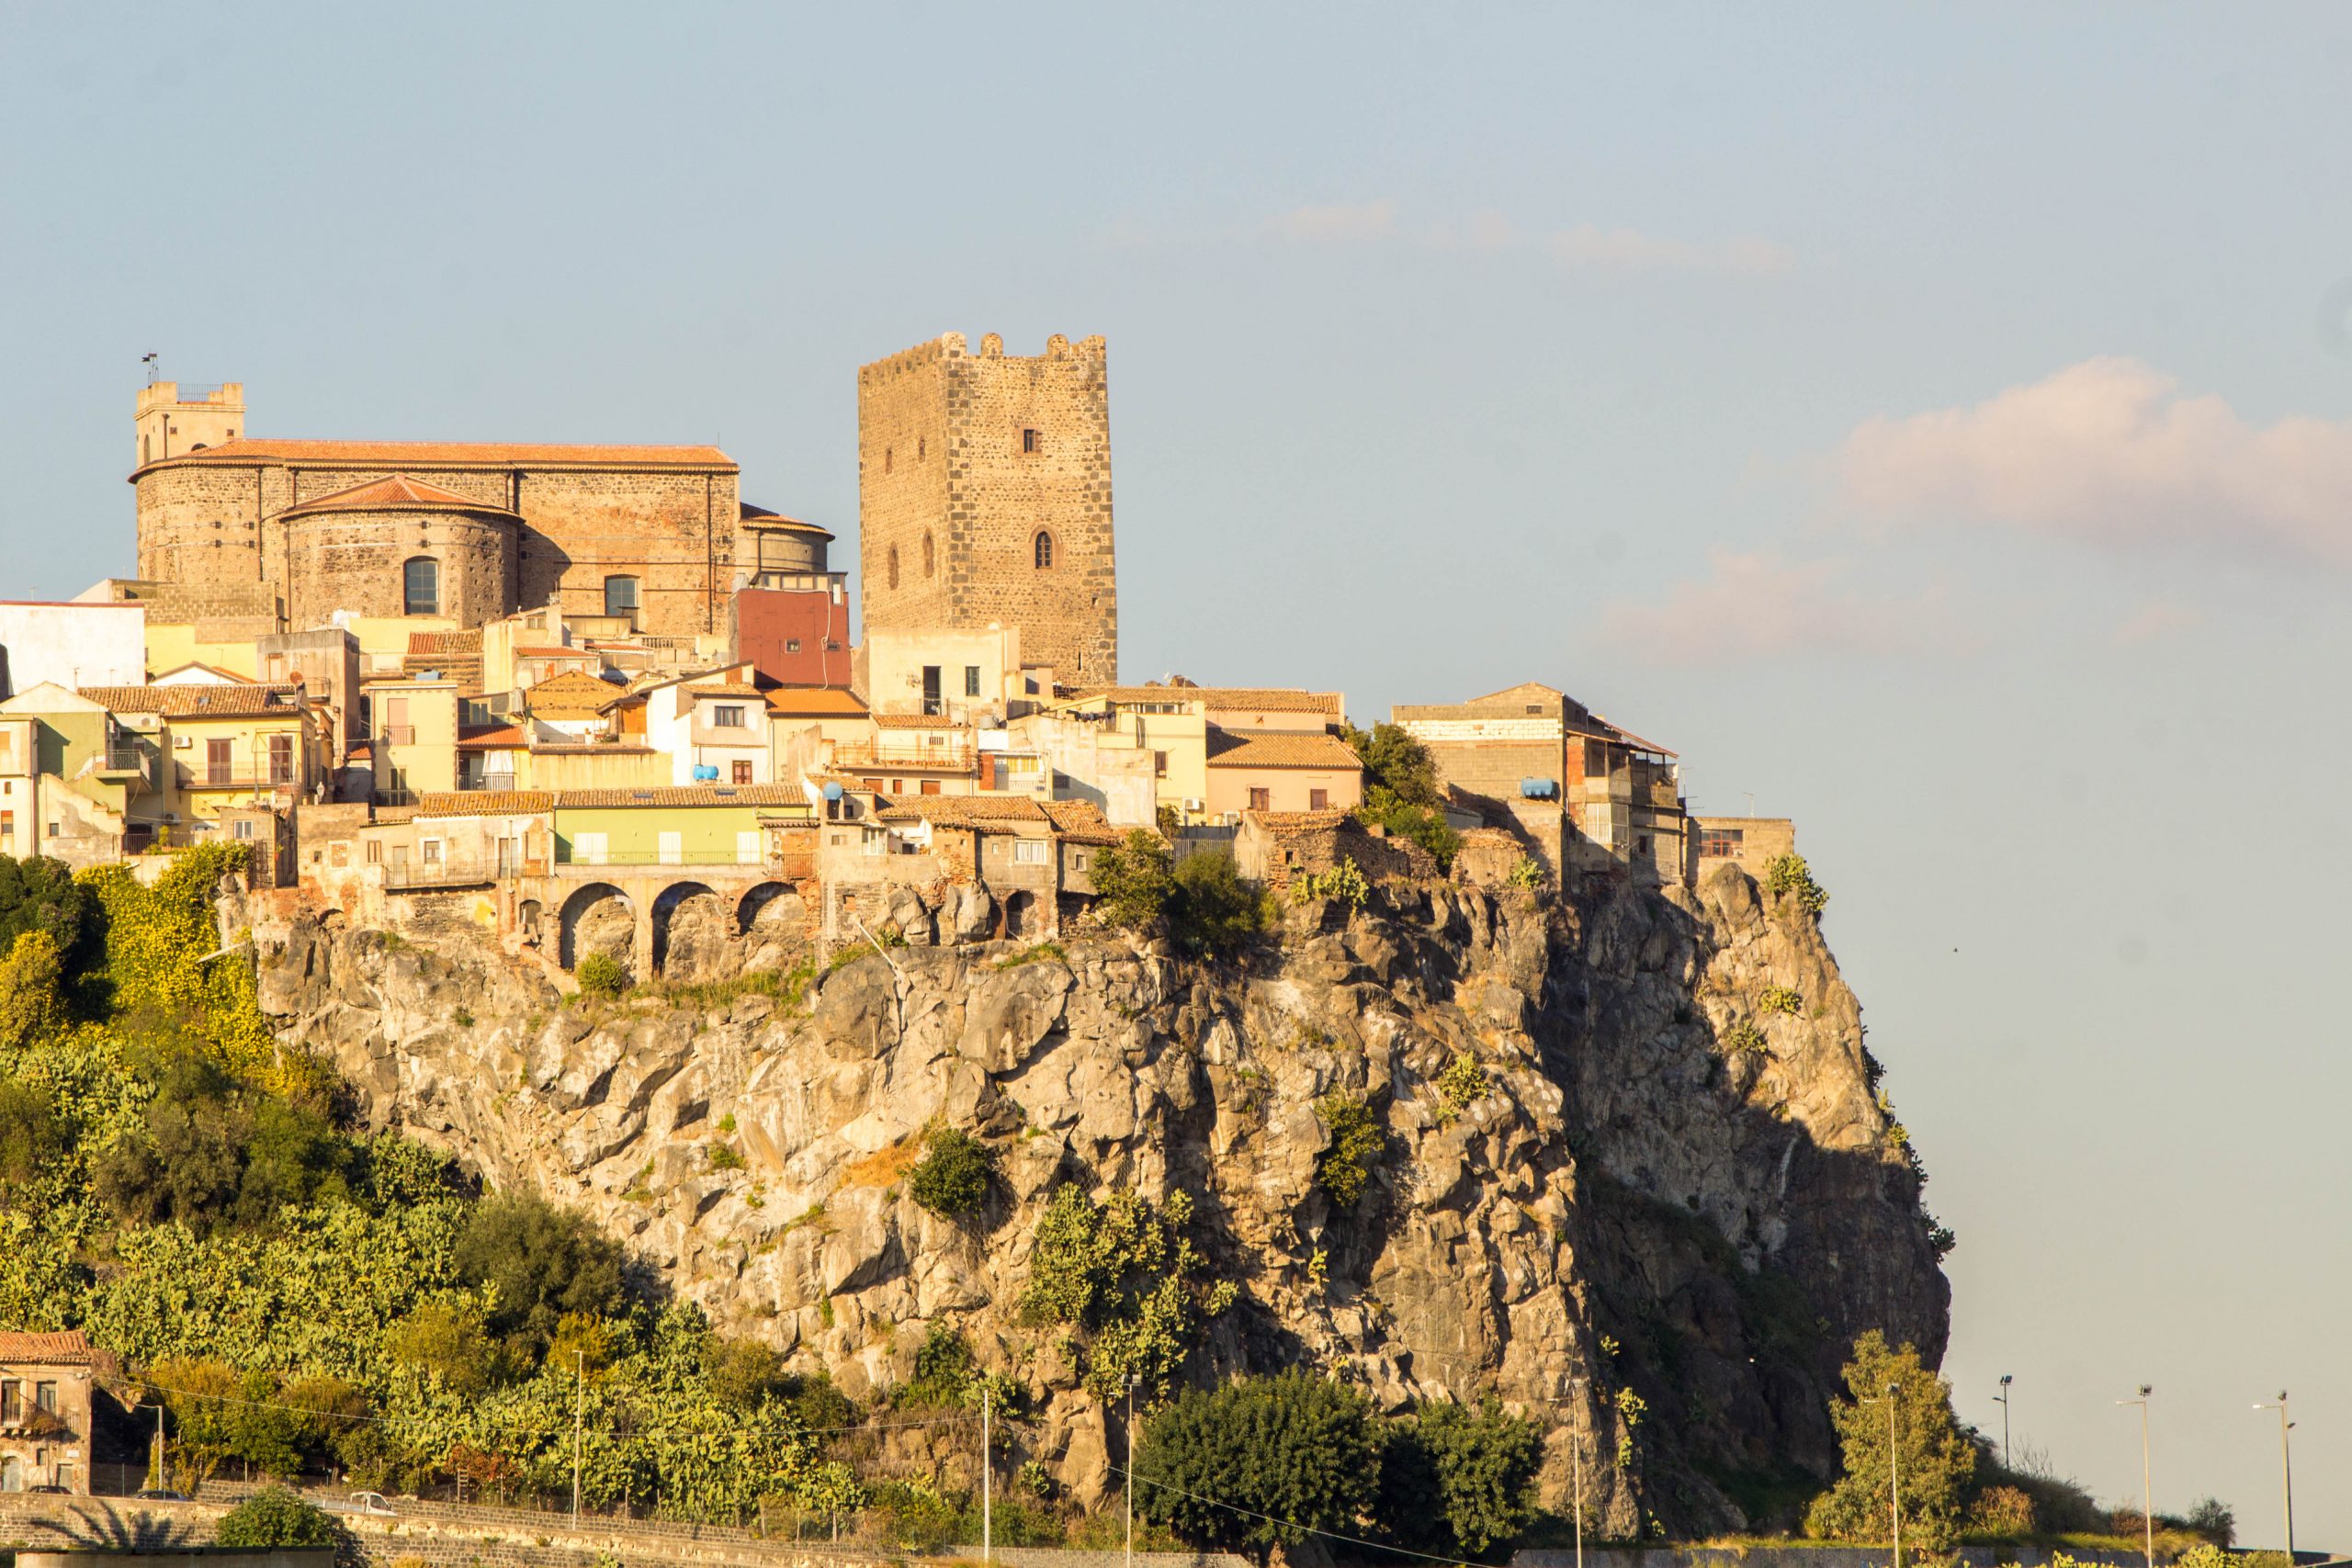 The Sicilian Villages of “The Godfather”